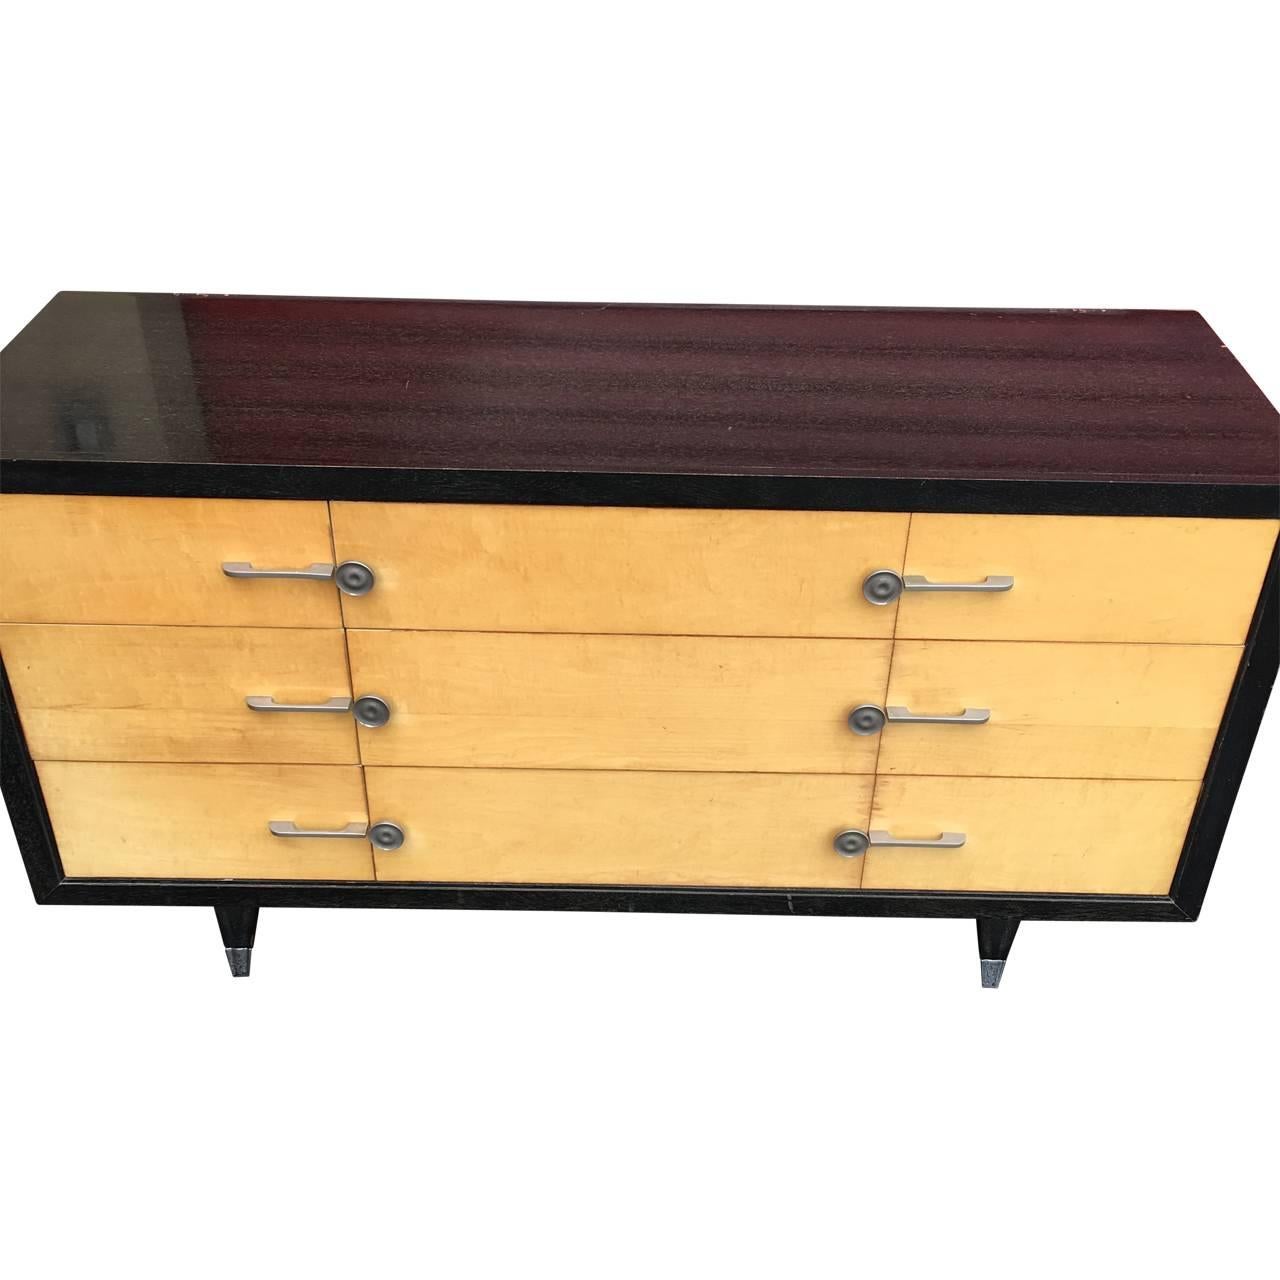 Nine-drawered cerused wood and faux parchment commode by Sieling Modern of Railroad, PA.
Commode is on black splayed legs with chrome-capped feet and with makers mark inside drawer.
The original mirror part that attaches to the rear side of the